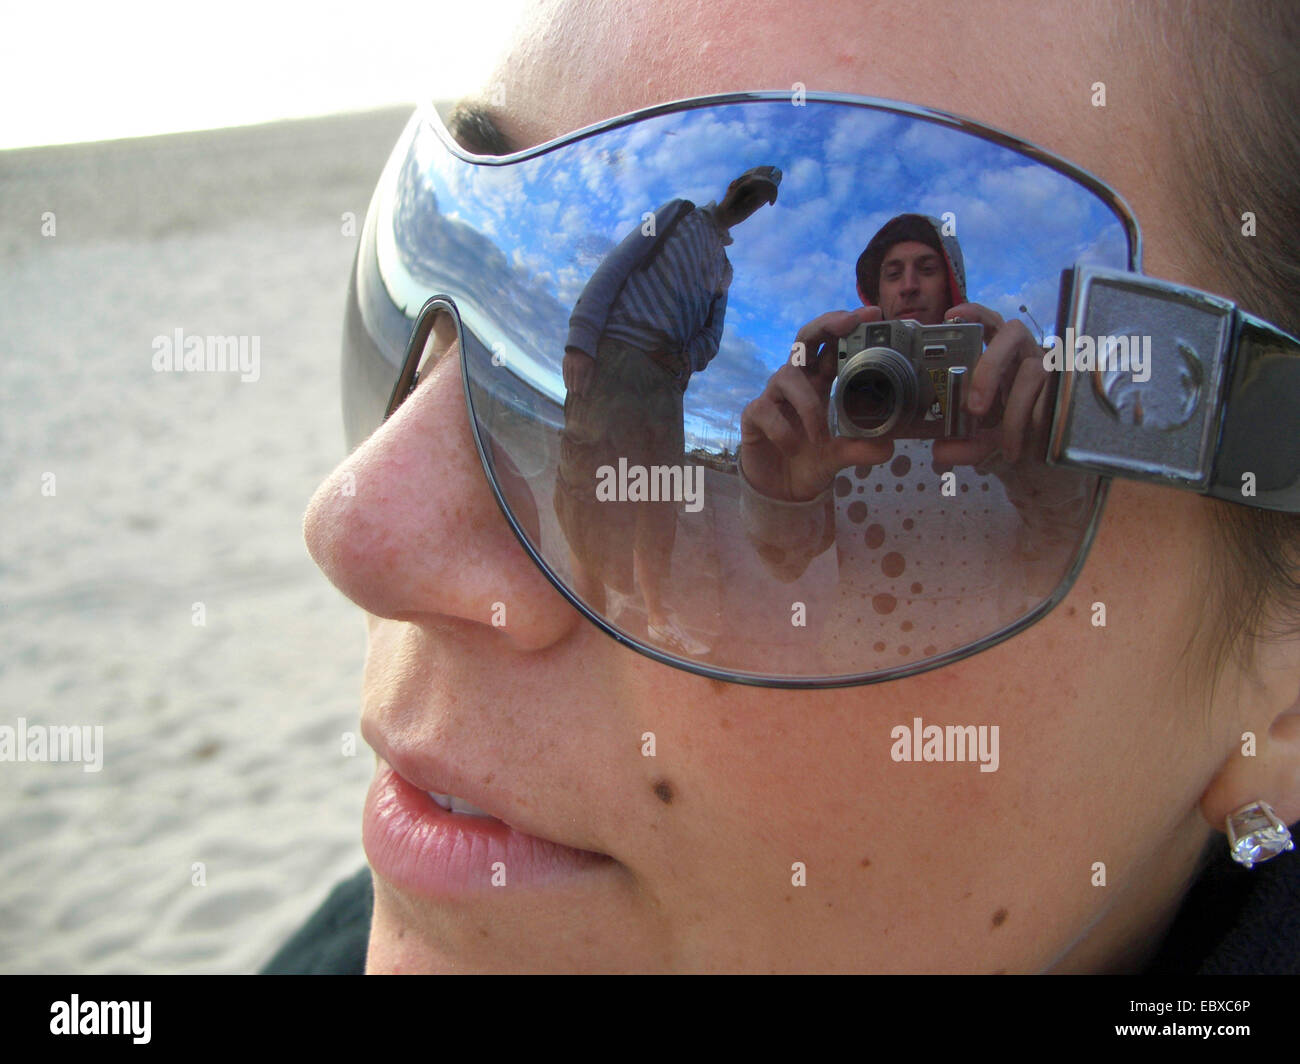 woman with sun glasses, photographer is reflected in the glasses, Australia, New South Wales Stock Photo